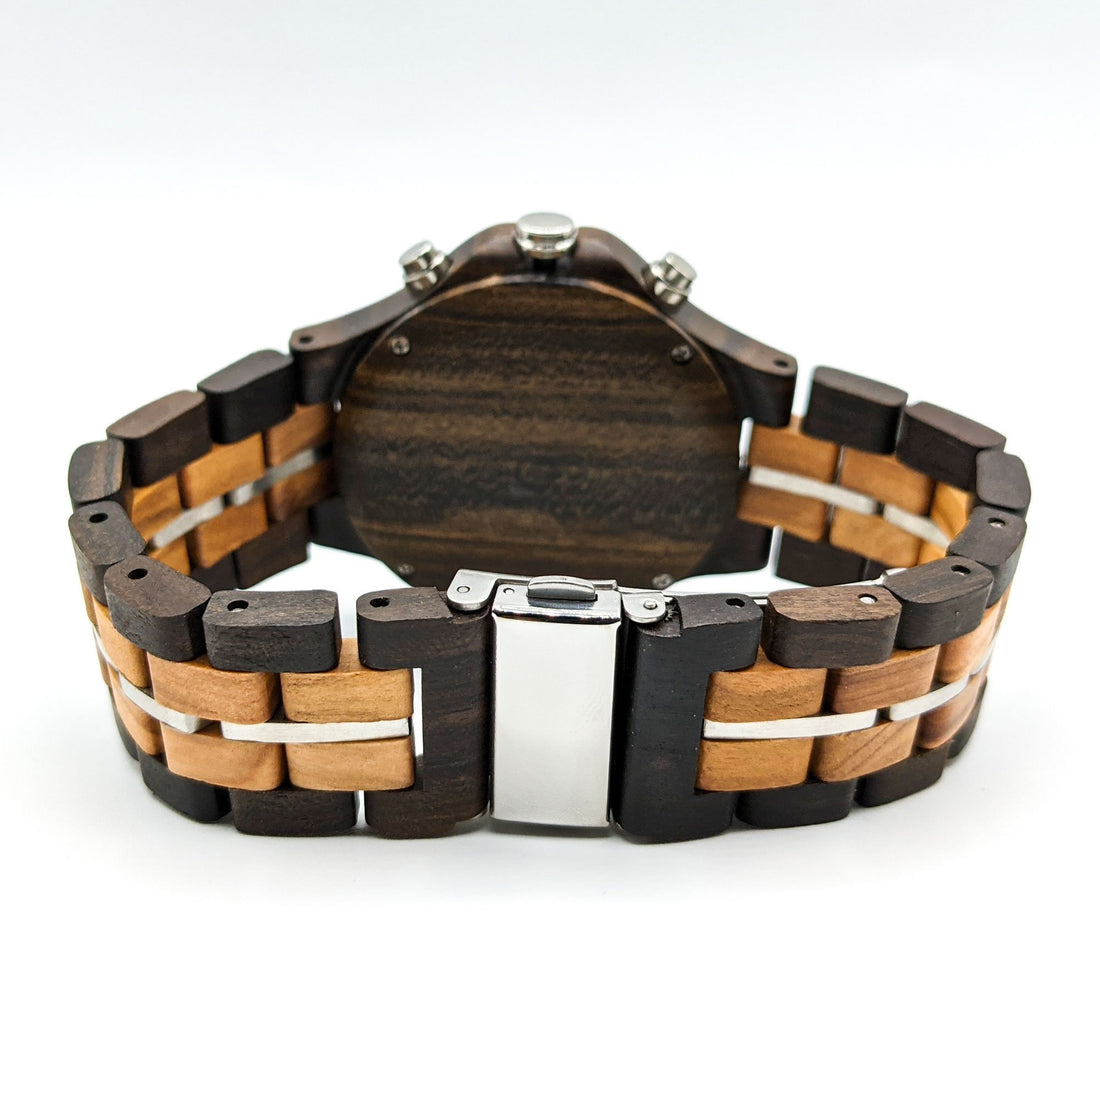 Wooden Watch Black Olive | Tinto - Dusty Saw